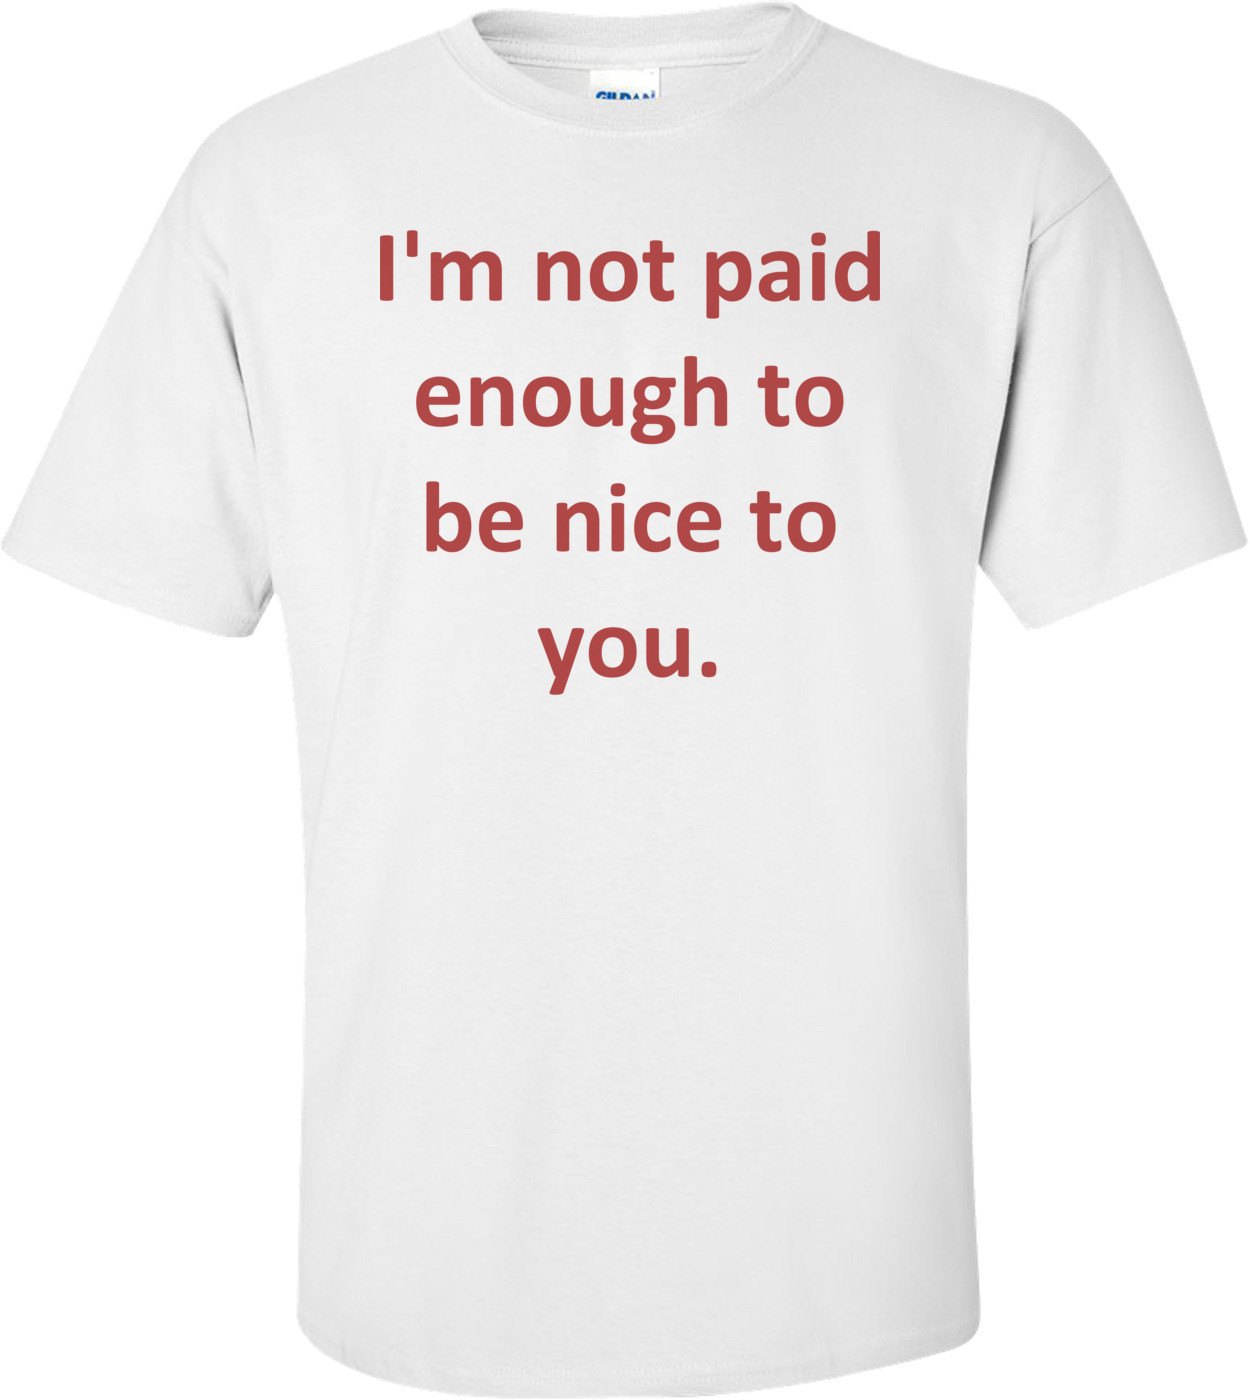 I'm not paid enough to be nice to you.